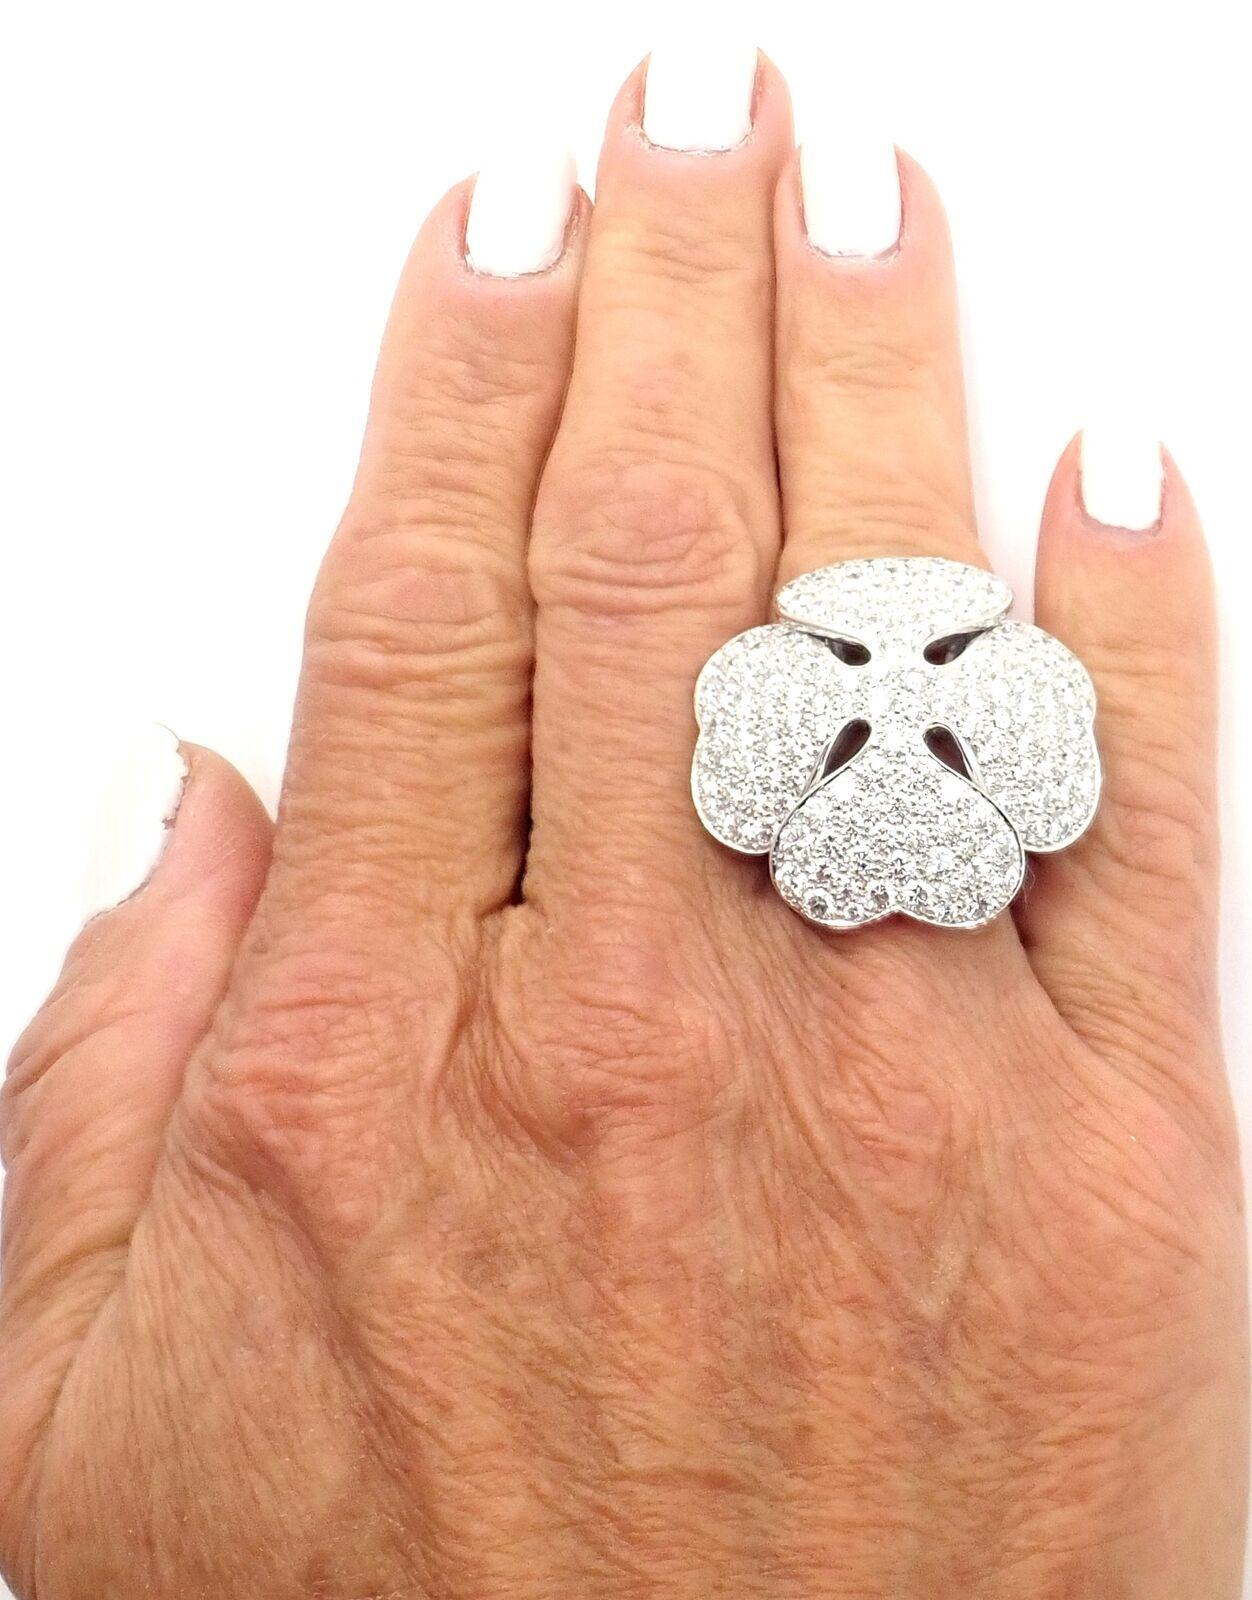 Cartier Anniversary Edition Diamond Pave Clover White Gold Cocktail Ring 2